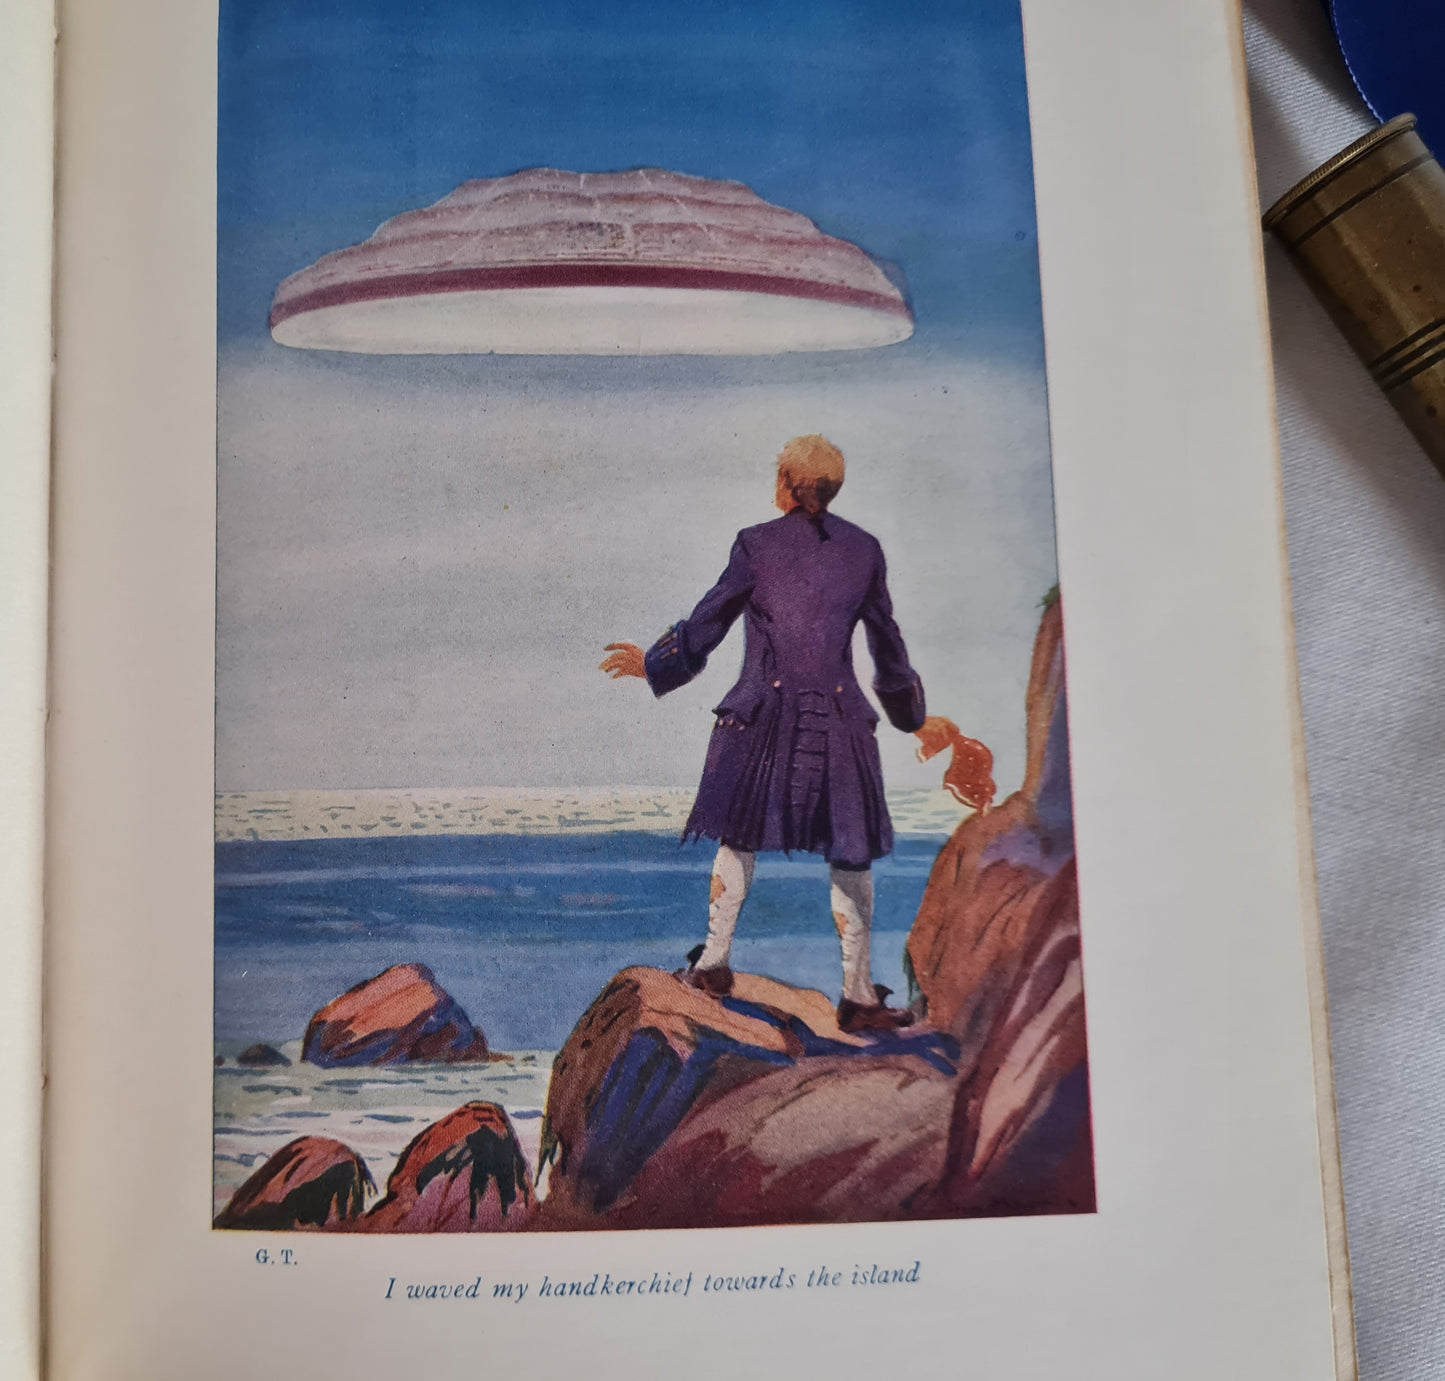 1930s Gulliver's Travels by Jonathan Swift / Hutchinson & Co., London / Decorative Boards / Colour Illustrations, Maps / Antique Book